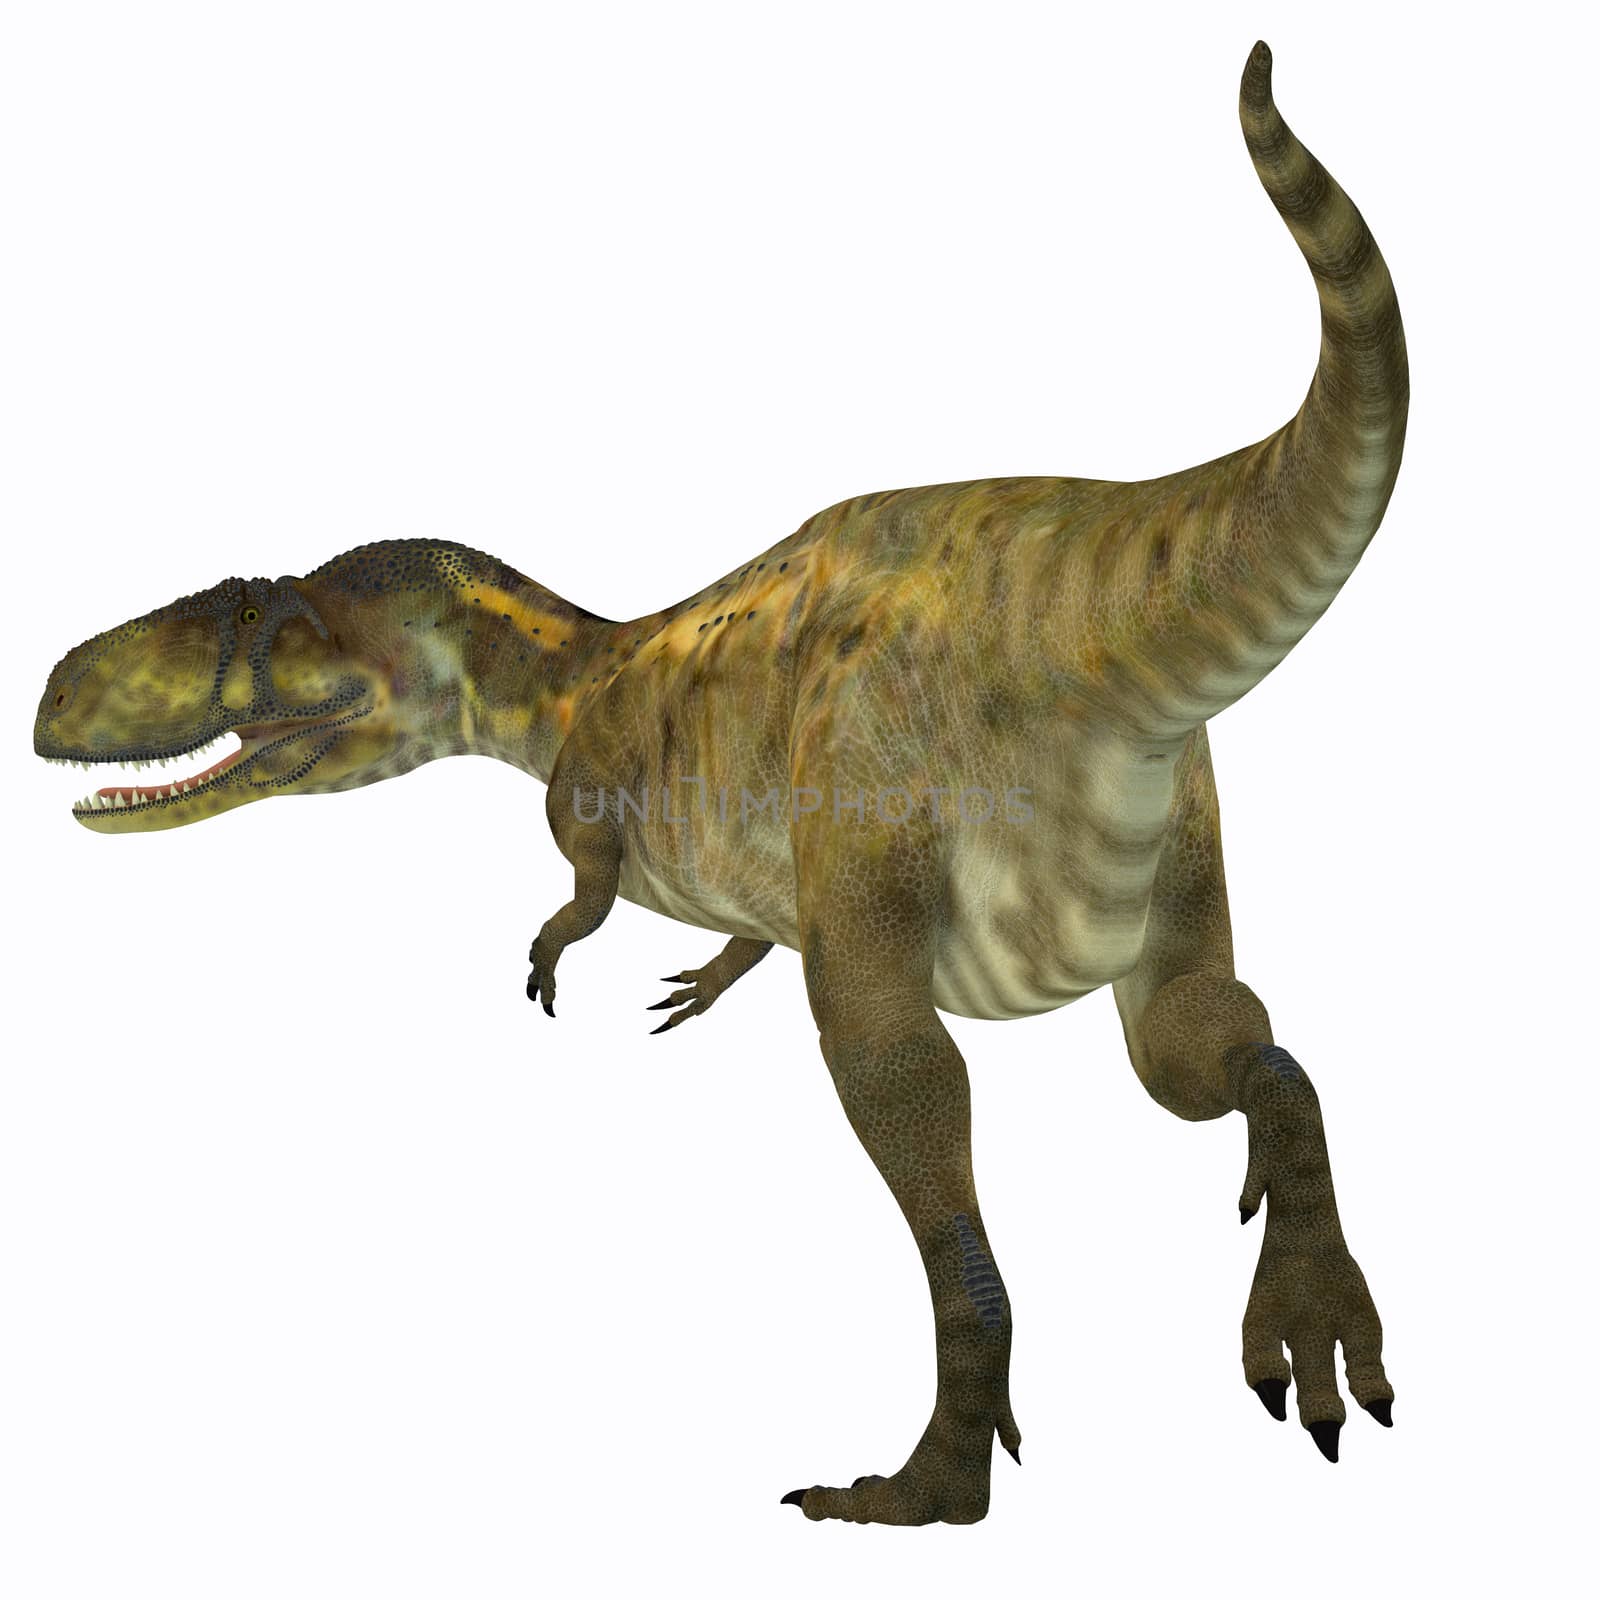 Abelisaurus was a carnivorous theropod dinosaur that lived in Argentina in the Cretaceous Period.